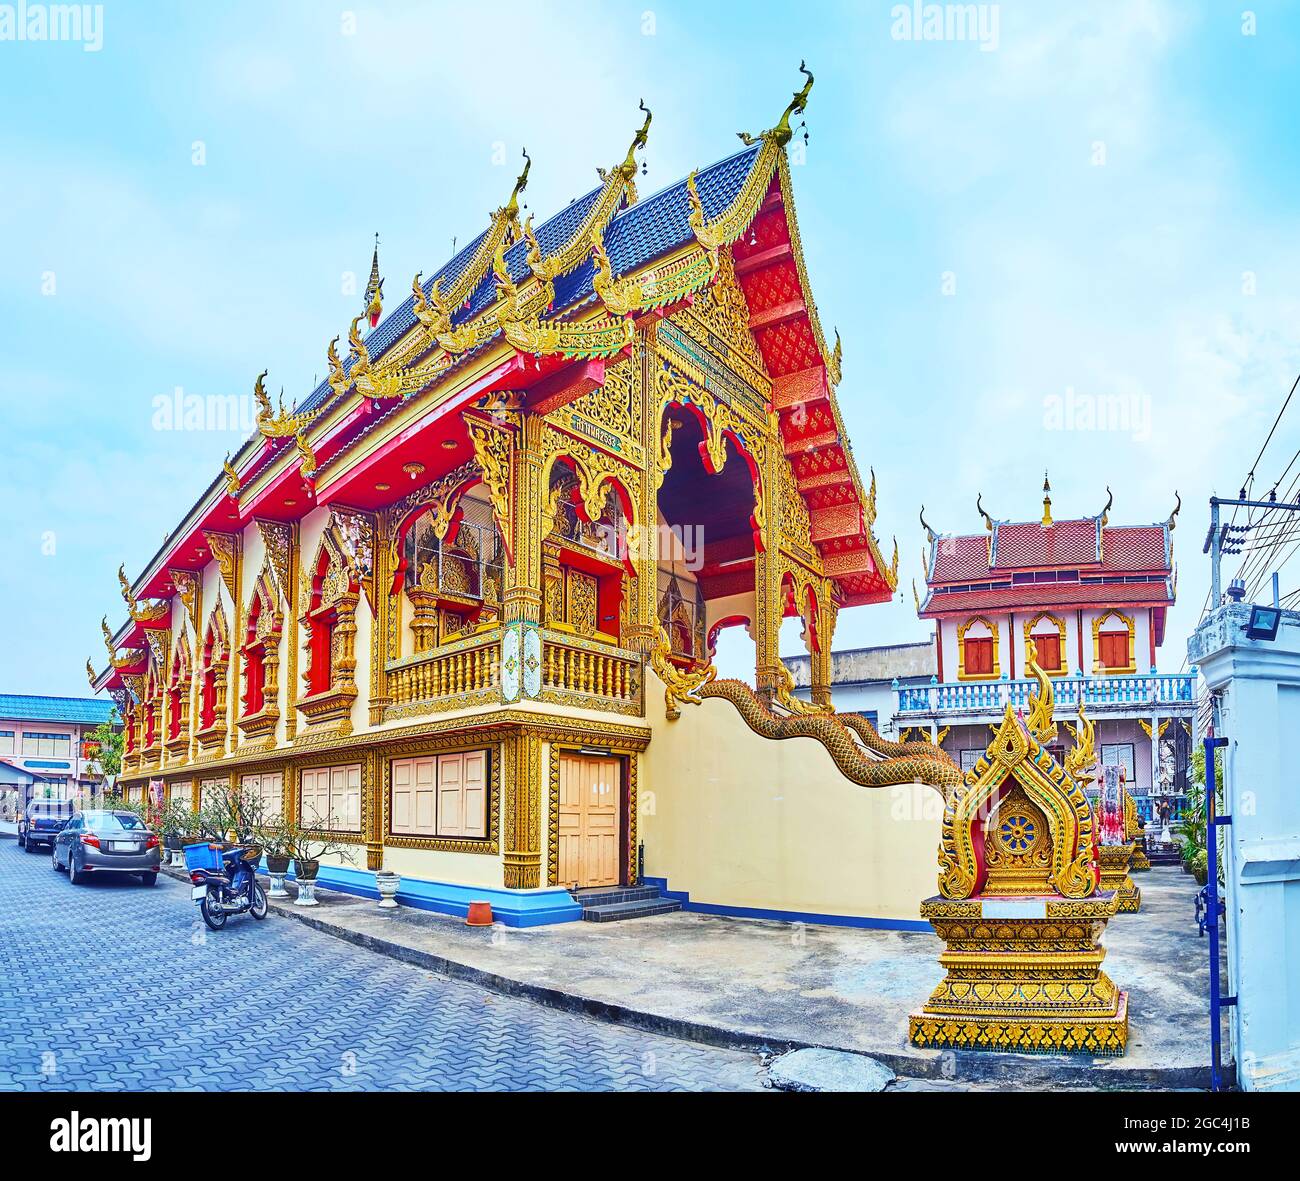 Historic building of Ubosot of Wat Chai Mongkhon Temple with amazing gable (pyathat) roof, carved bargeboards, chofas (roof decors) and facade, Lamphu Stock Photo